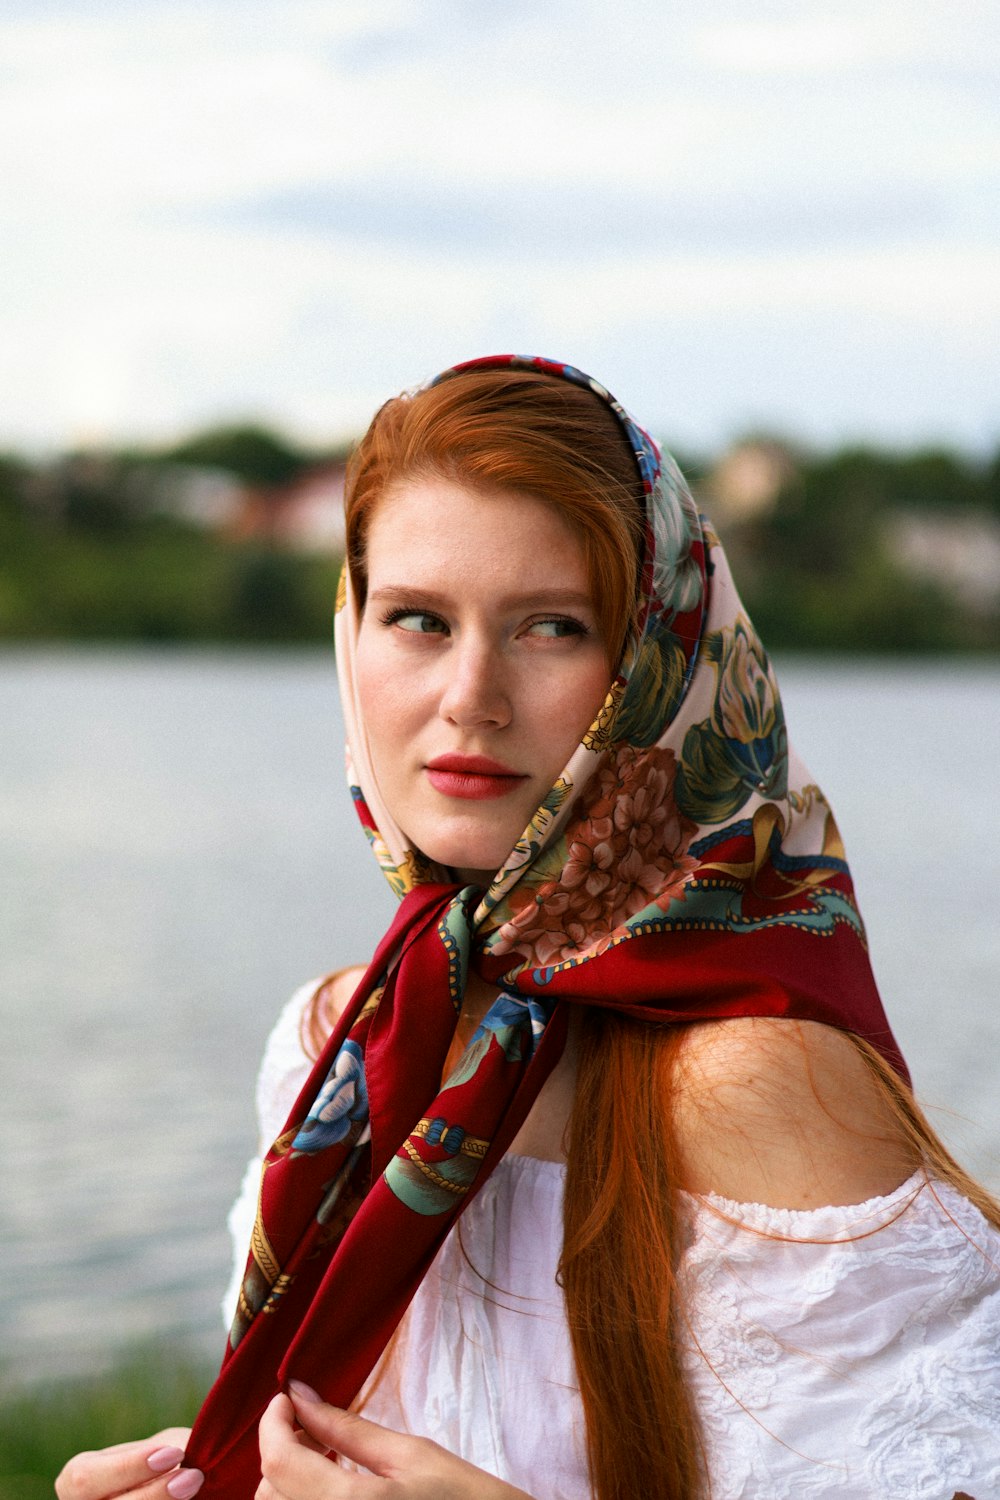 a woman with a scarf around her neck